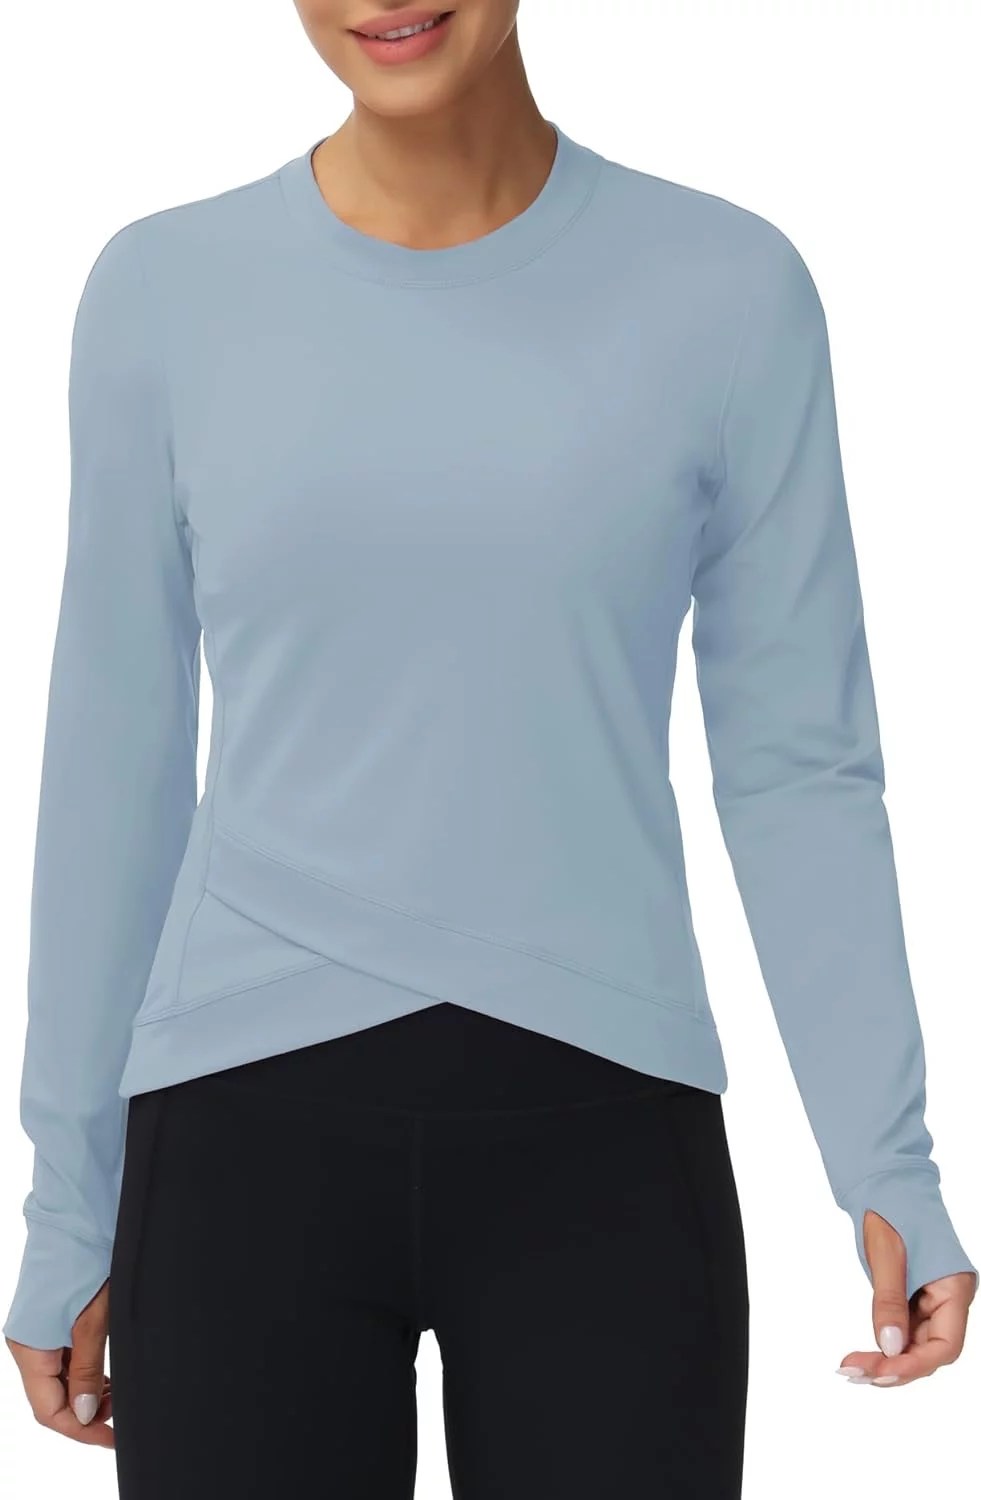 The Gym People Compression Long Sleeve Top